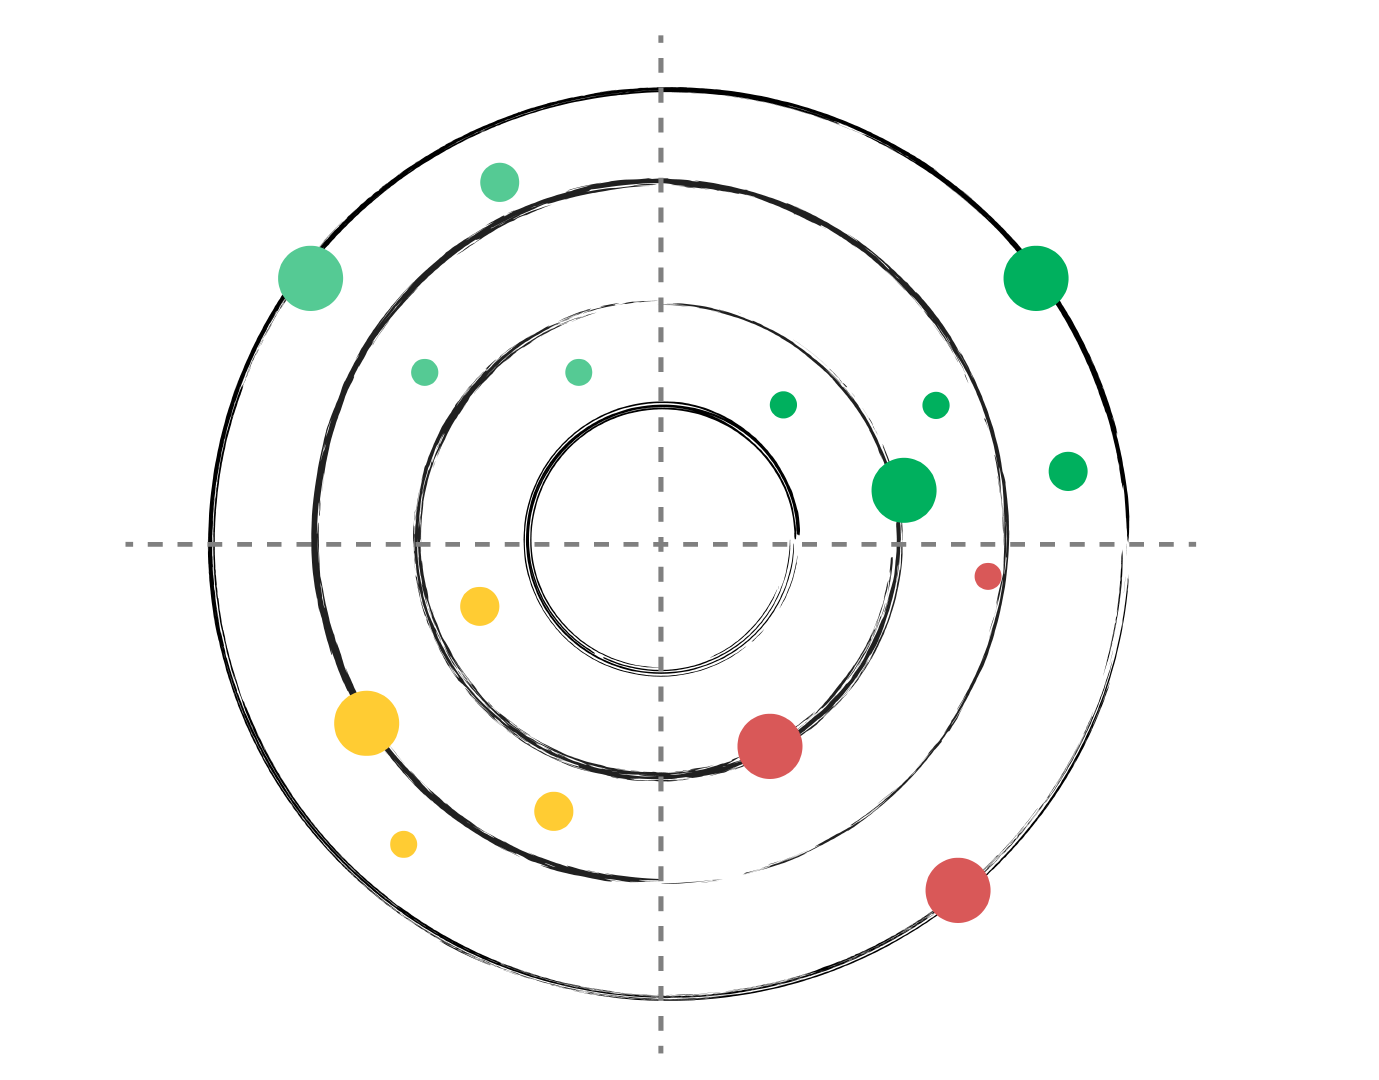 Representation of a technological radar with circles and green, yellow and red colors